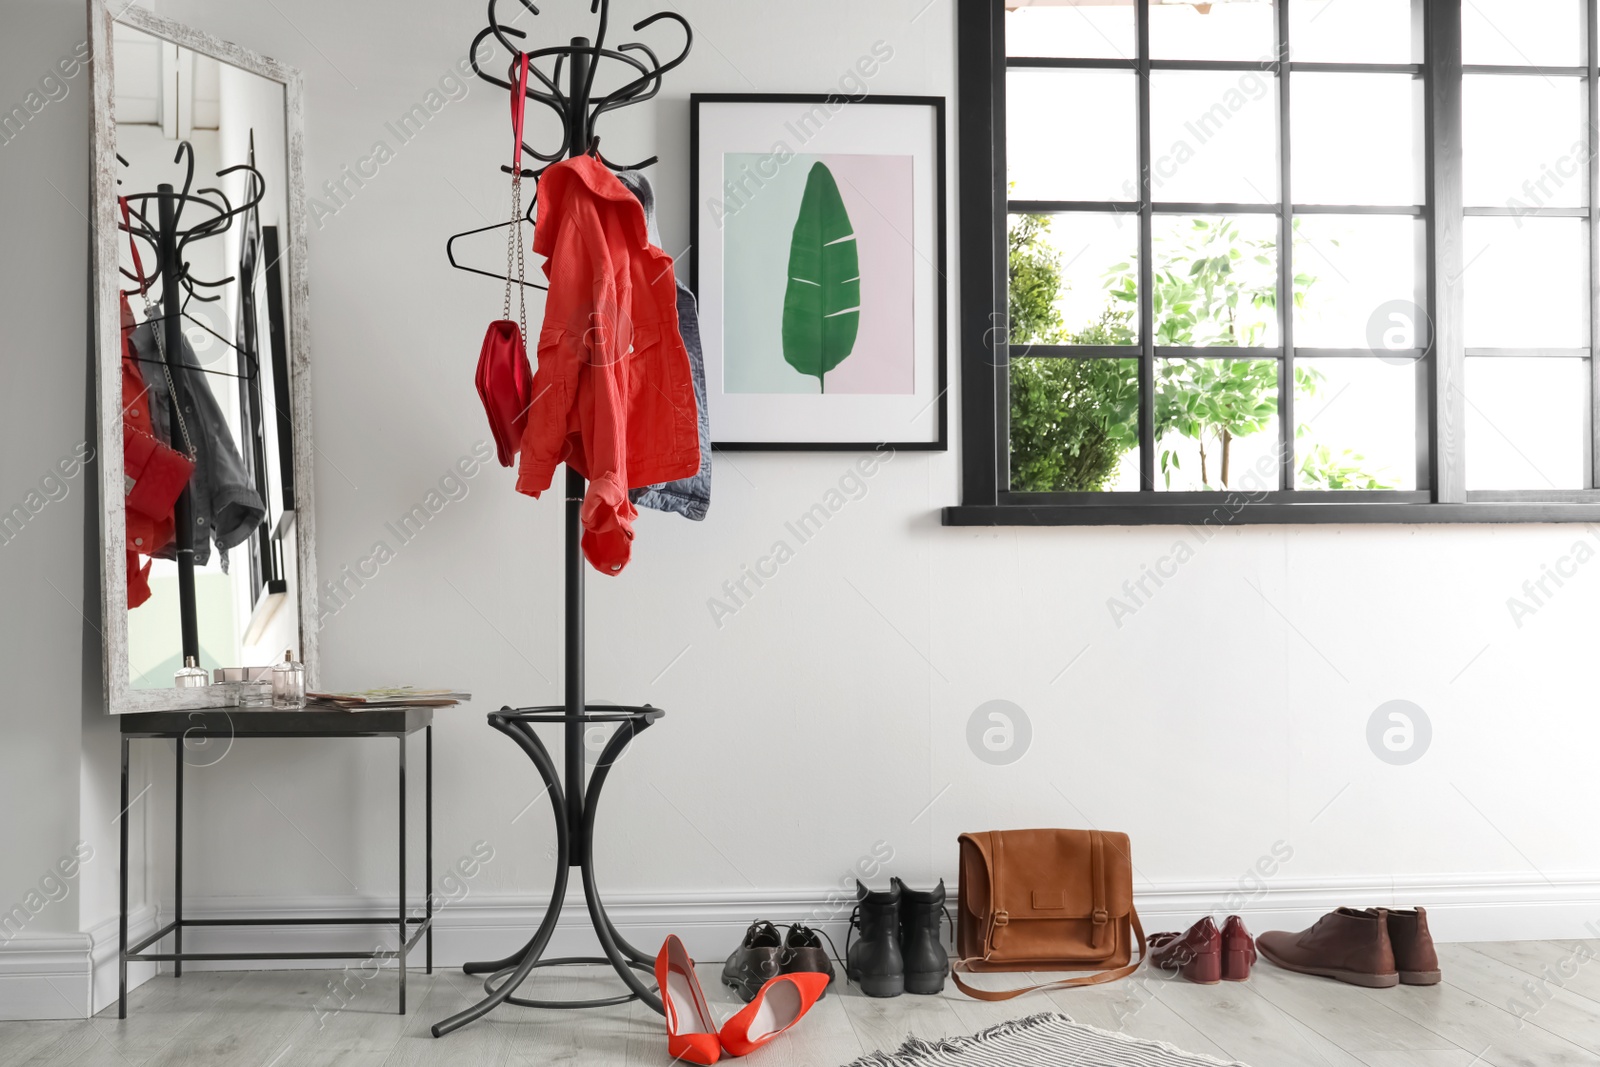 Photo of Modern hallway interior with clothes on hanger stand and mirror